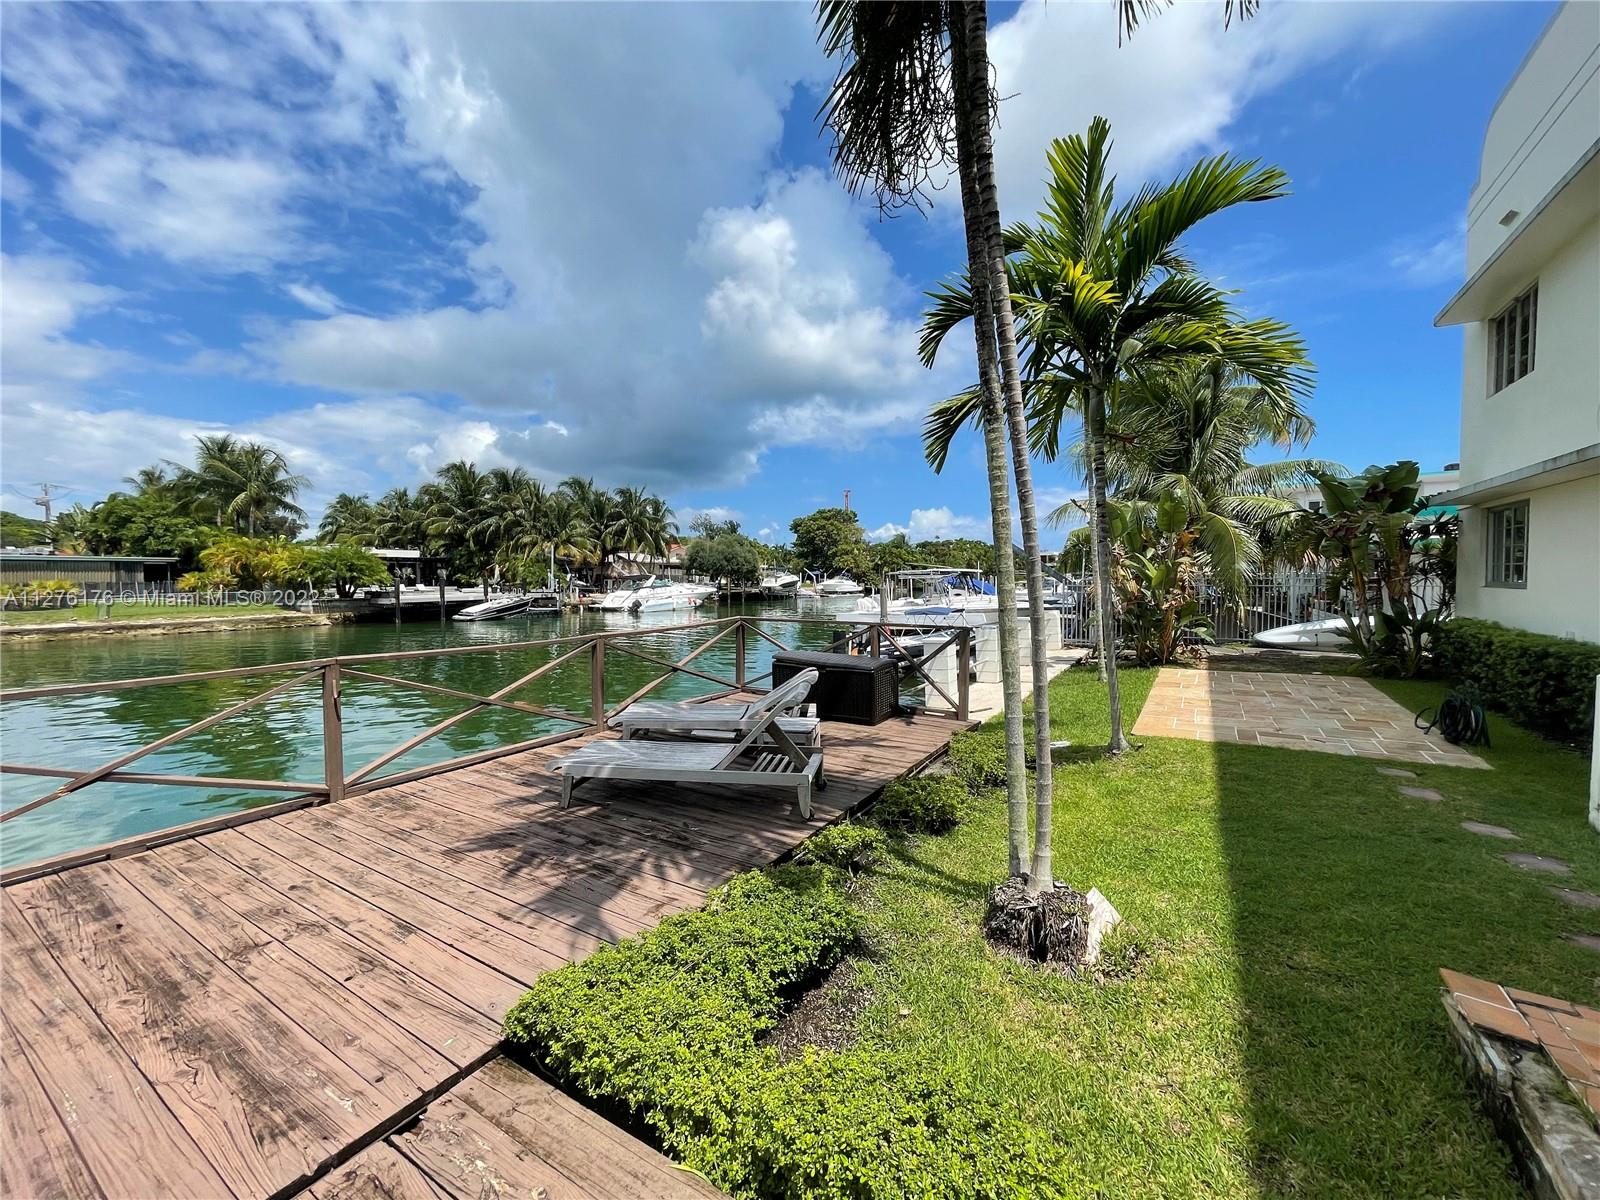 Beautiful art deco building located in Normady Island with direct water view. Unit ready to move-in or great for investment. Brand new central A/C. Tenant occupied with monthly rent at 2,000$. 
Unit face directly on the canal where you can enjoy paddle boarding.